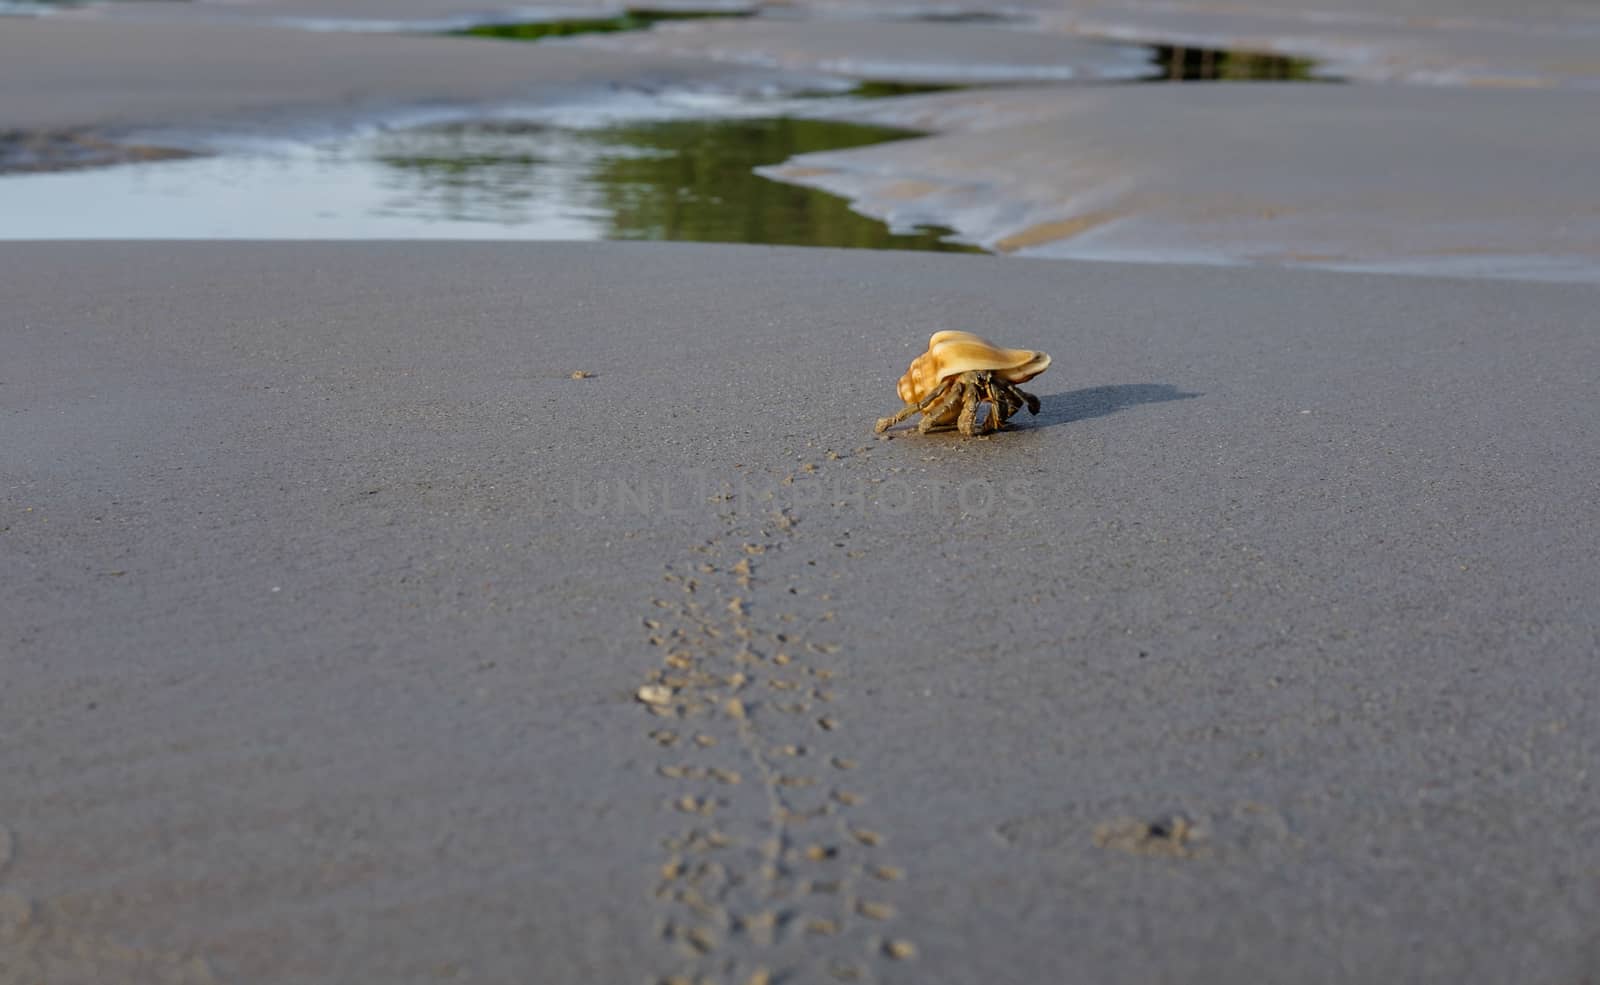 Hermit crab leaves the footprints in the sandy beach near the sea